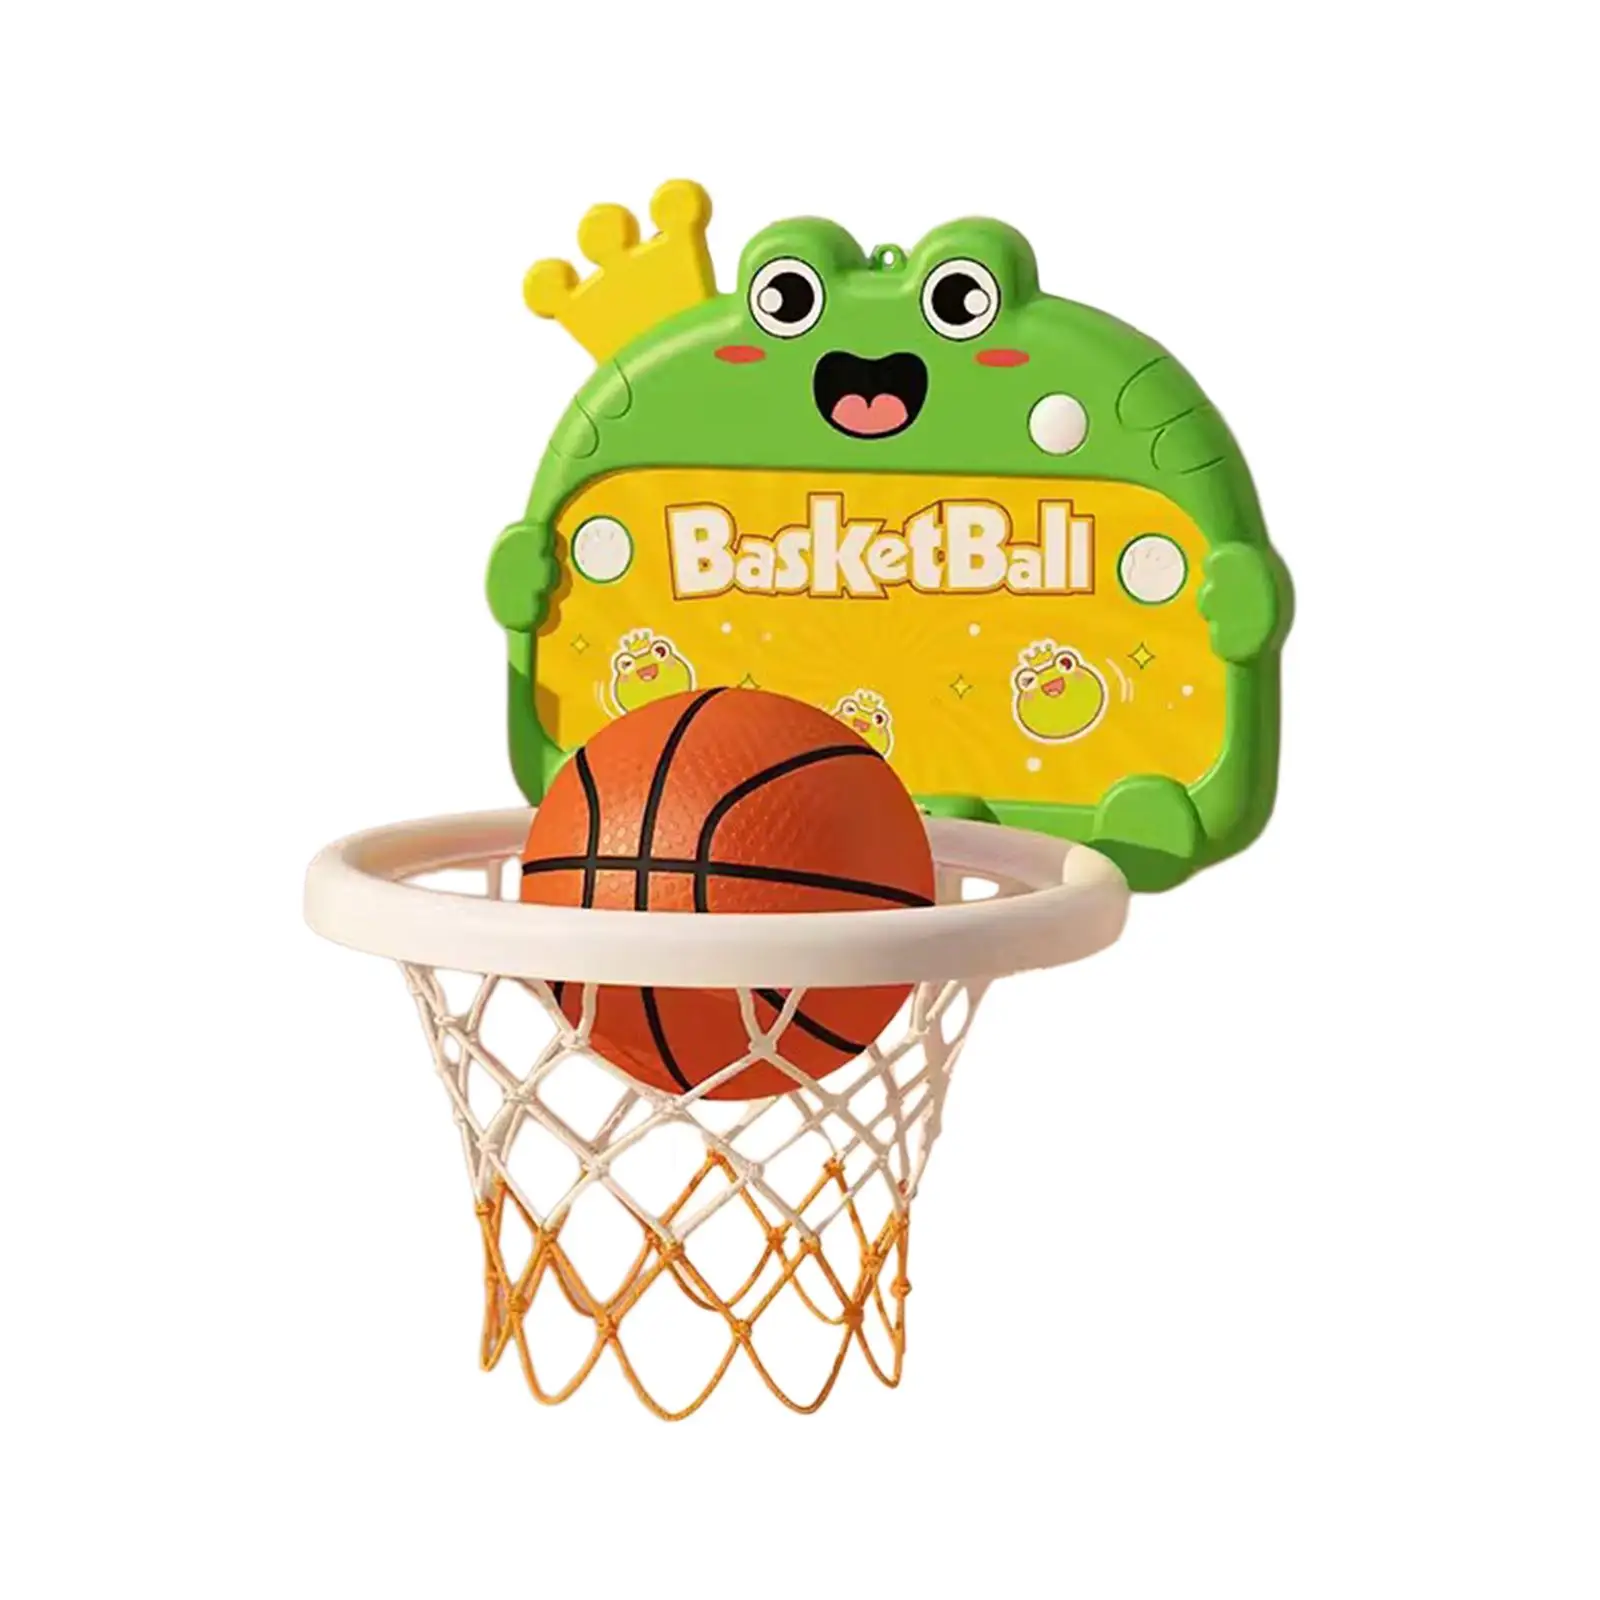 Mini Basketball Hoop Set Boys Girls Ages 2 3 4 Year Old Educational Easy to Install with Basketball for Living Room Door Wall